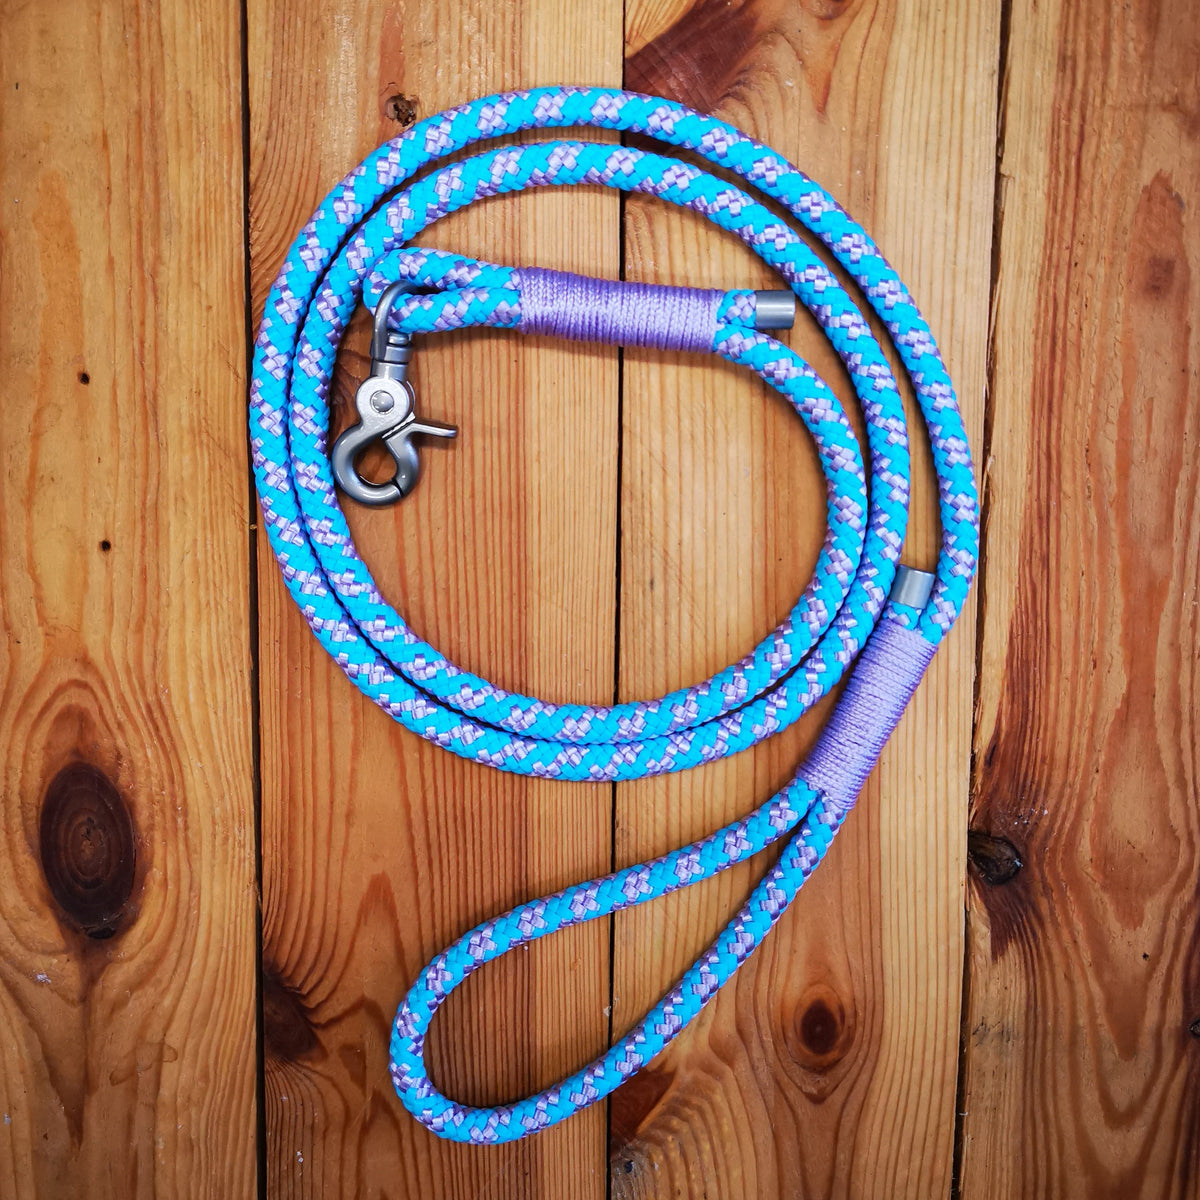 Baby Blue and Lavender Rope Dog Lead - The Mewstone Candle Co